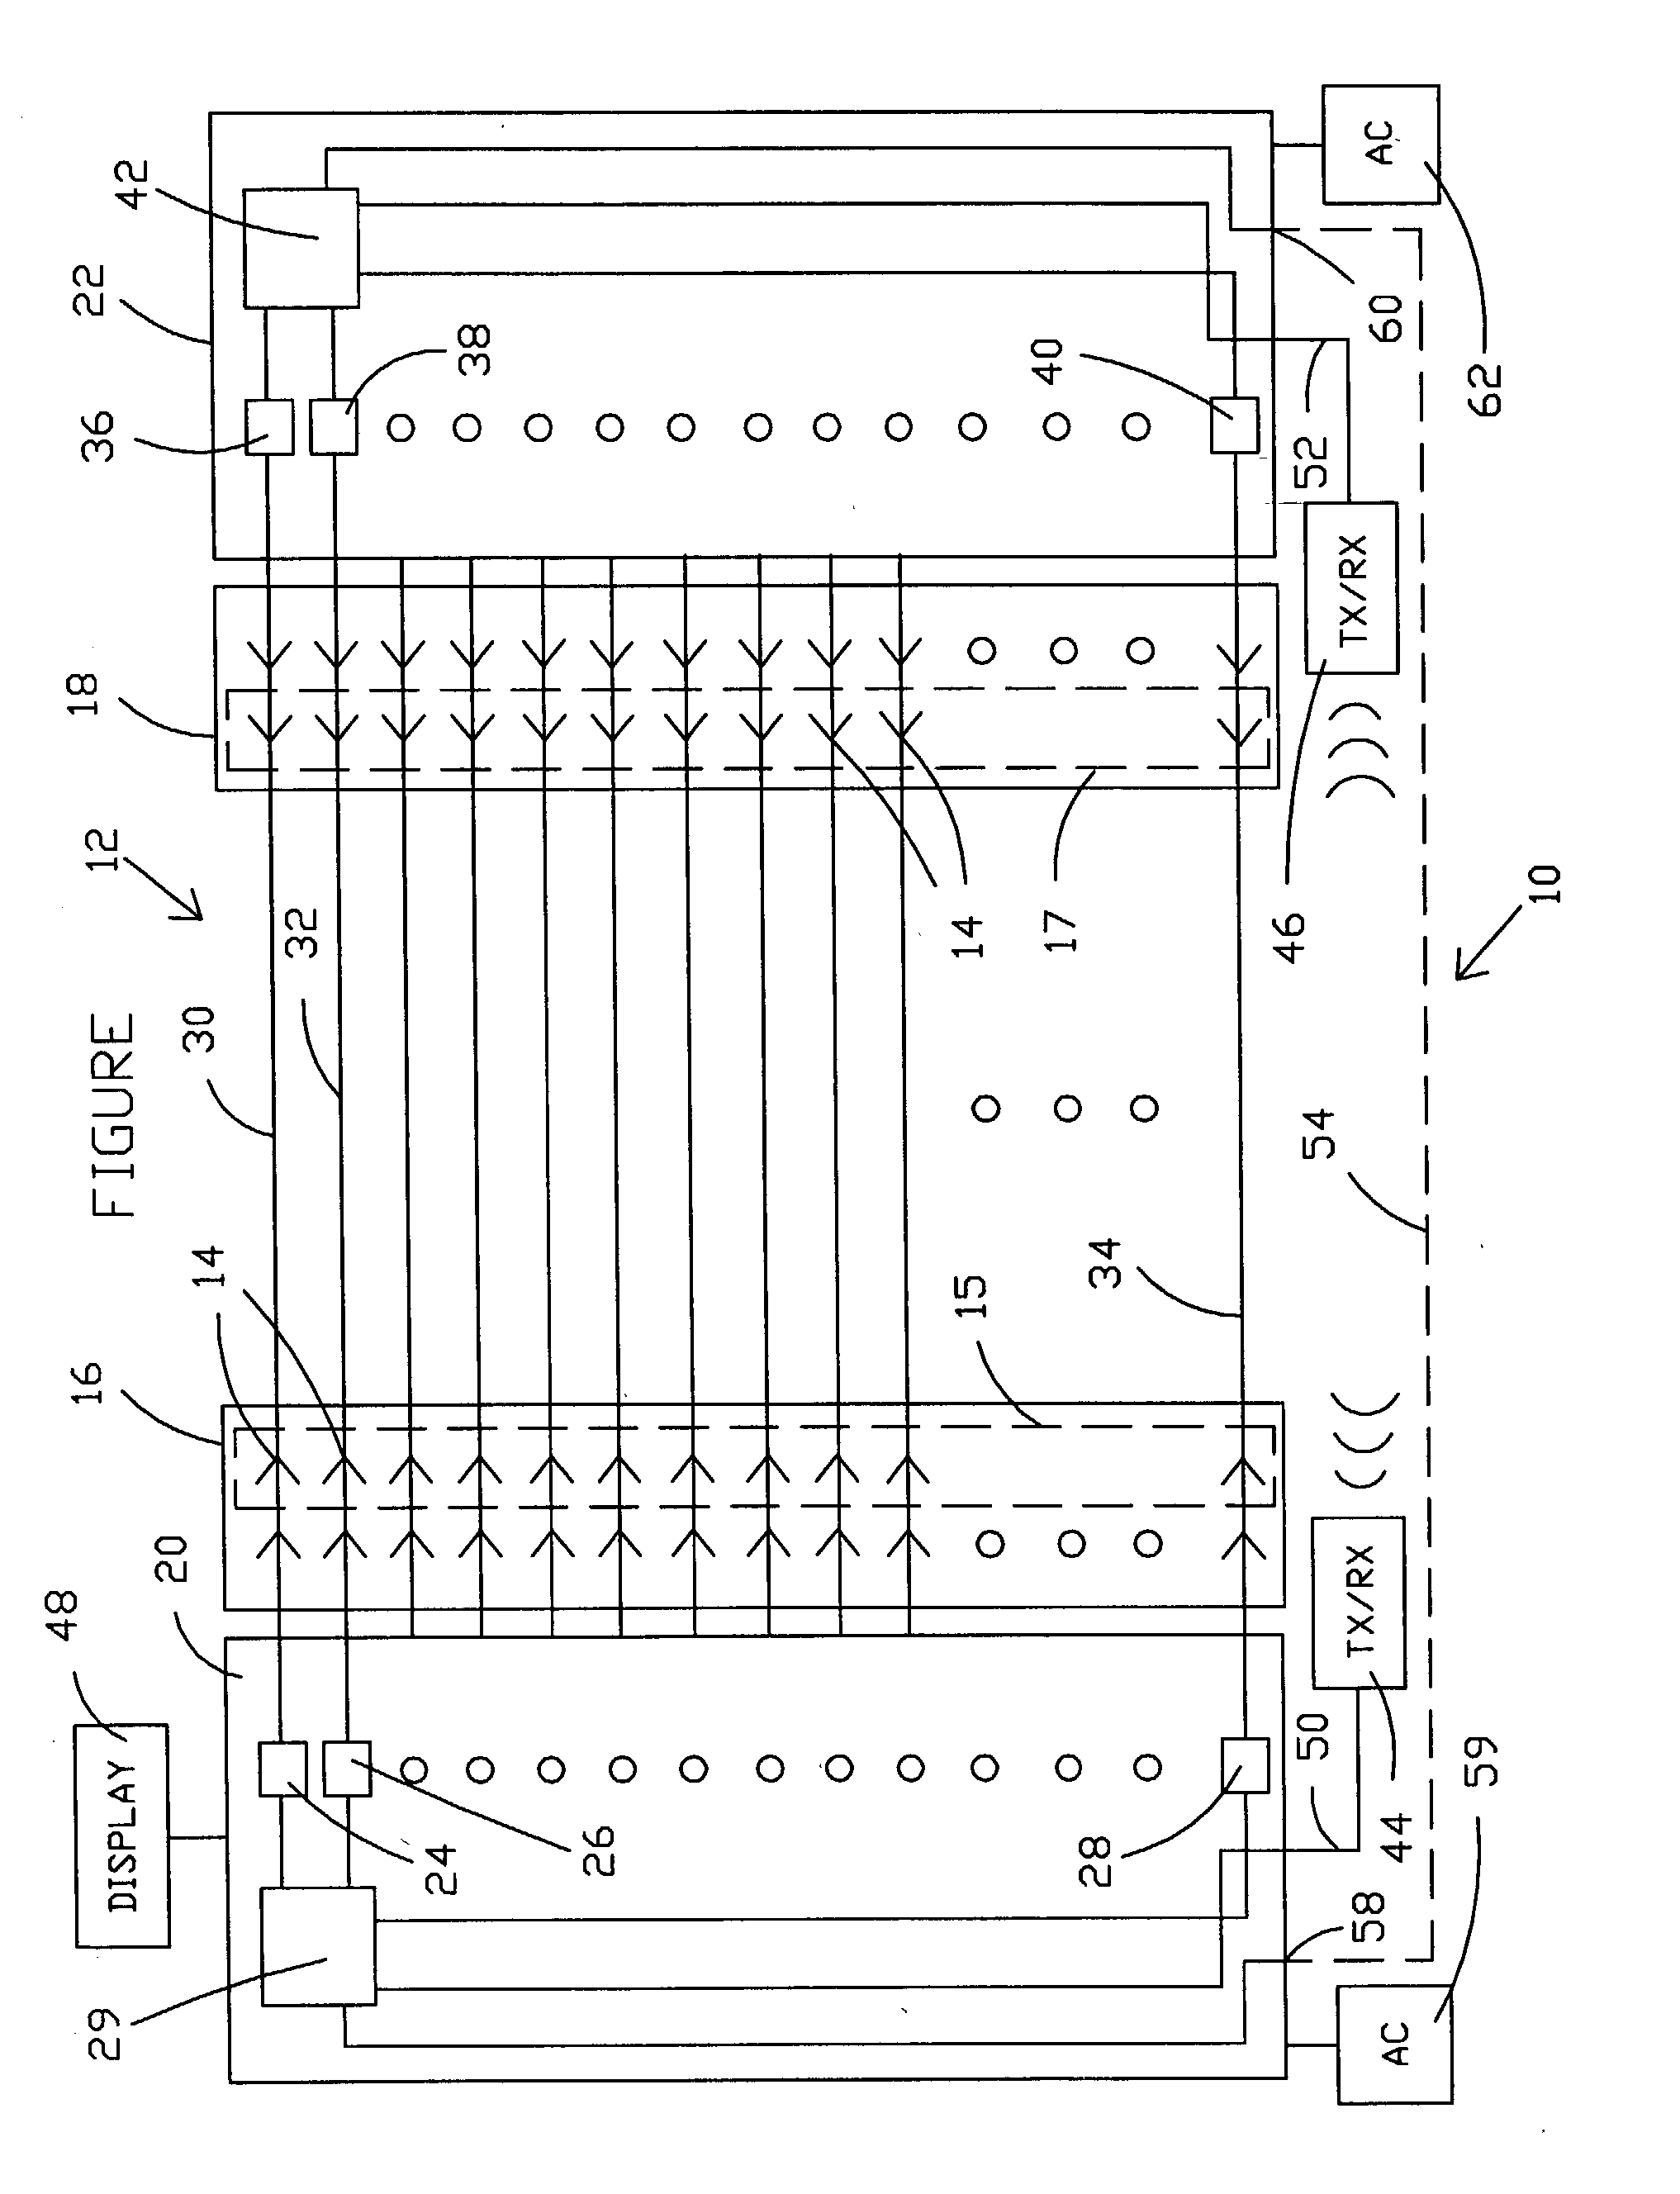 Wireless multiconductor cable test system and method